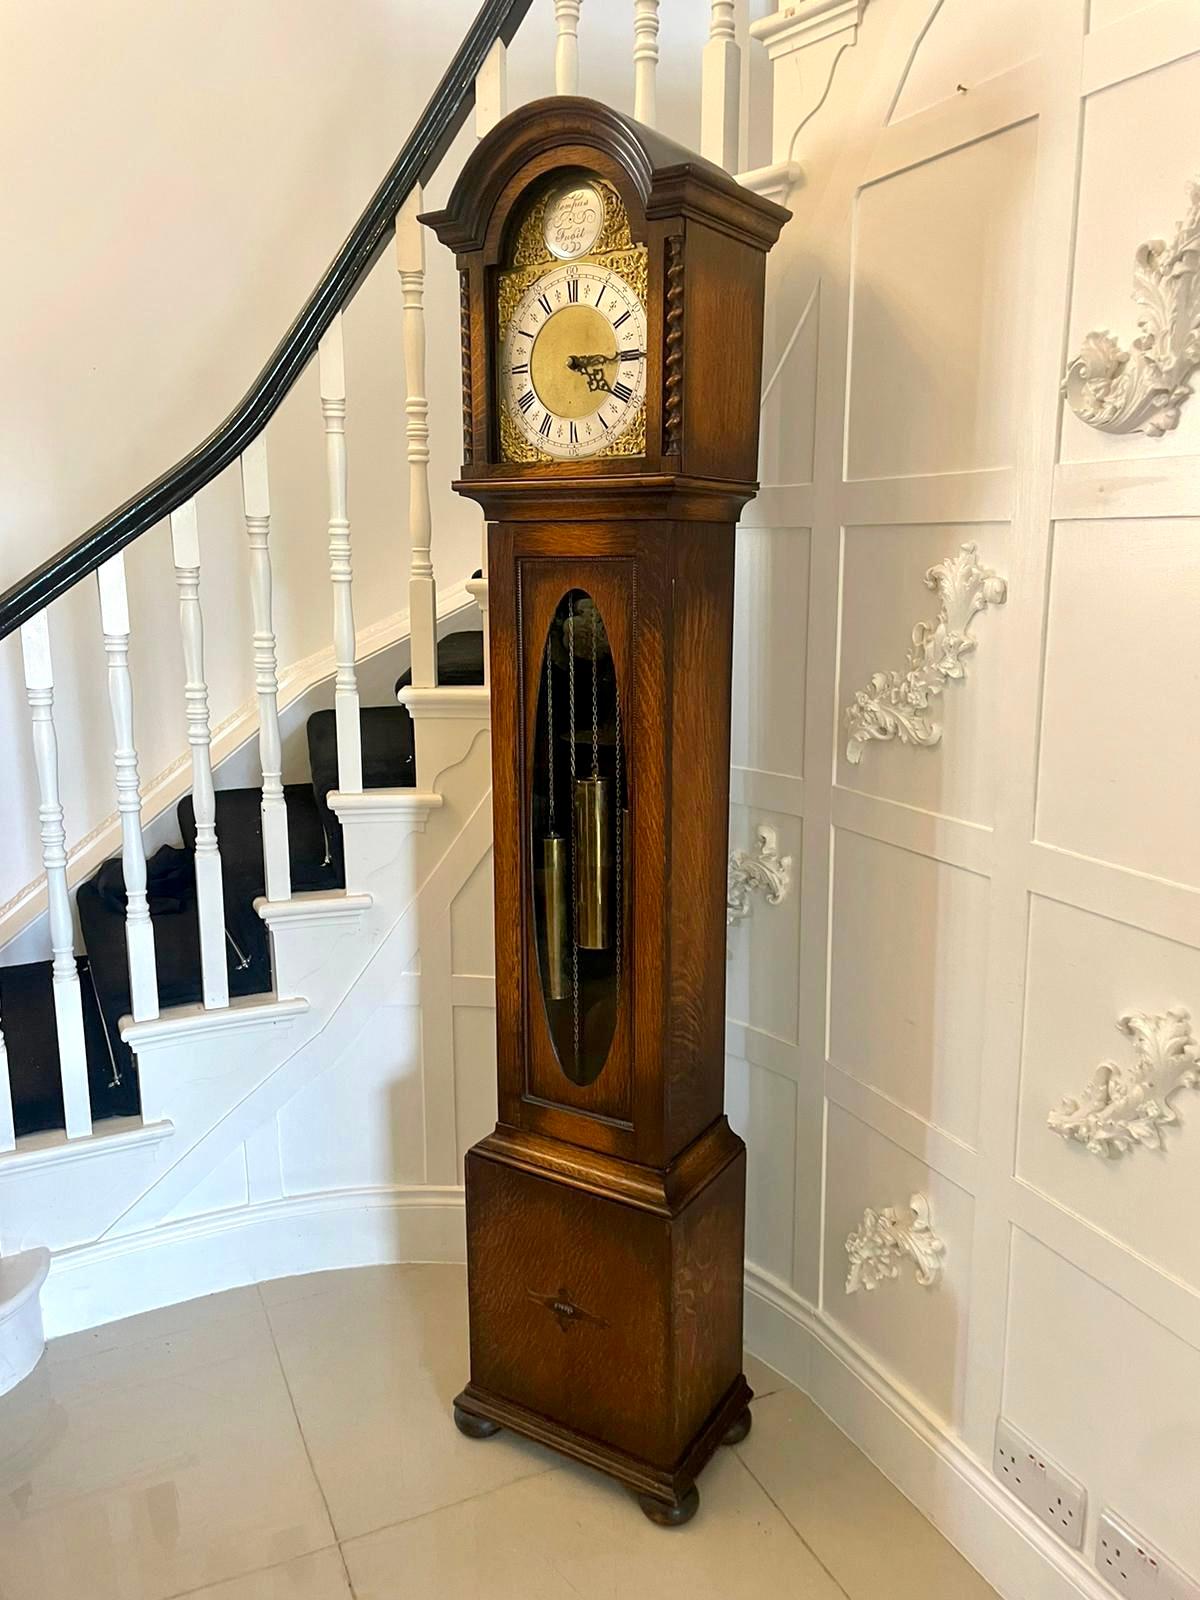 Antique quality oak brass face chiming grandmother clock having a brass arched dial with original hands, 8 day movement chiming every 15 minutes, original 3 brass weights and pendulum, barley twist columns to the sliding hood oval glass panel door